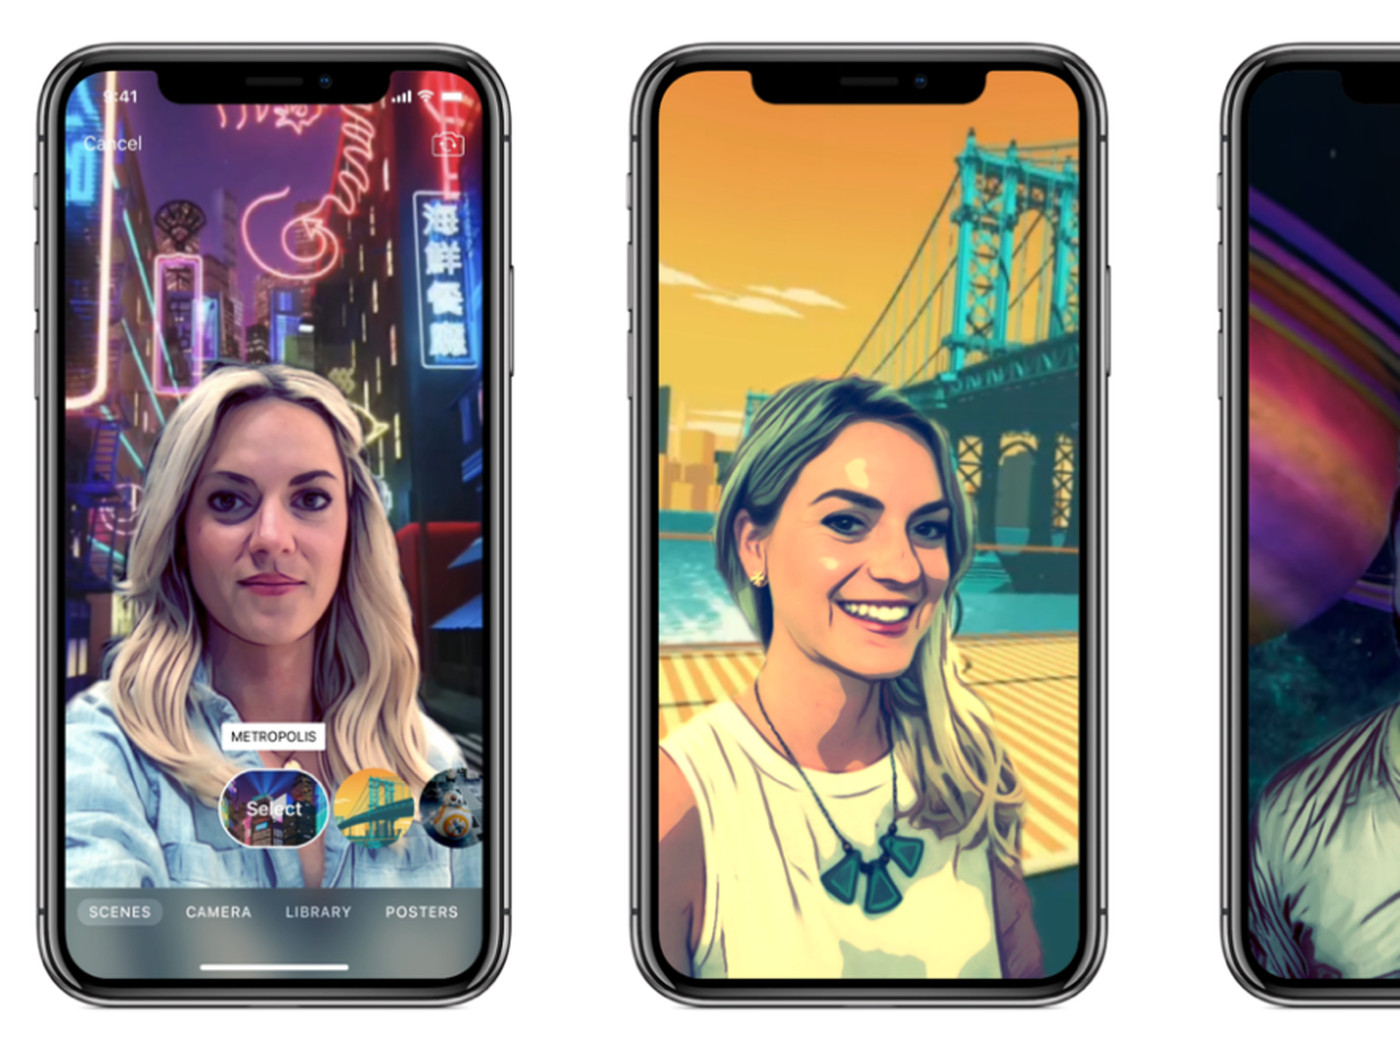 apple-clips-2-0-adds-360-degree-star-wars-backgrounds-to-selfies-on-iphone-x